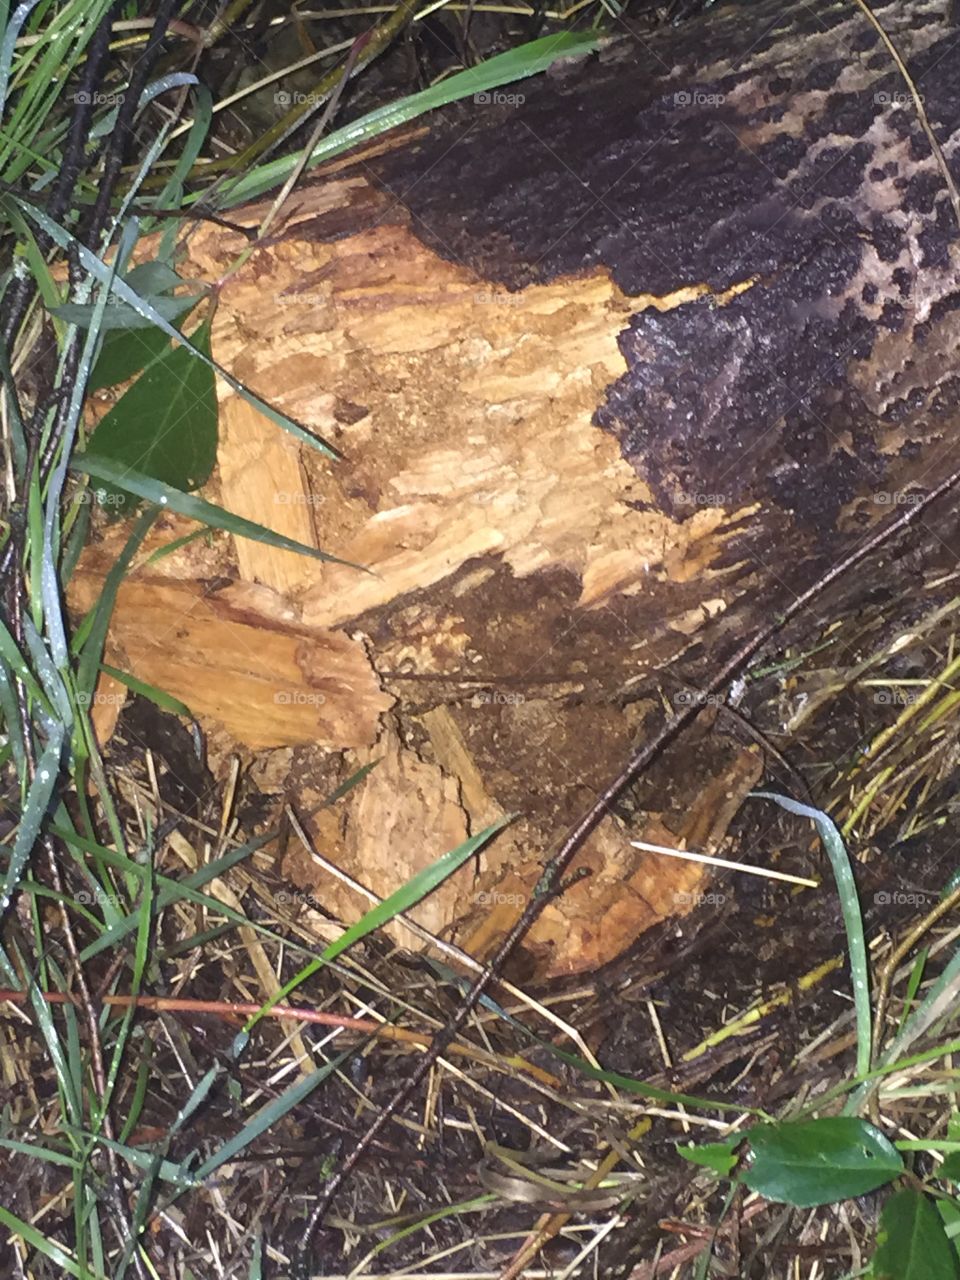 The tree rotted standing upright and then fell and showed it’s rotten core 